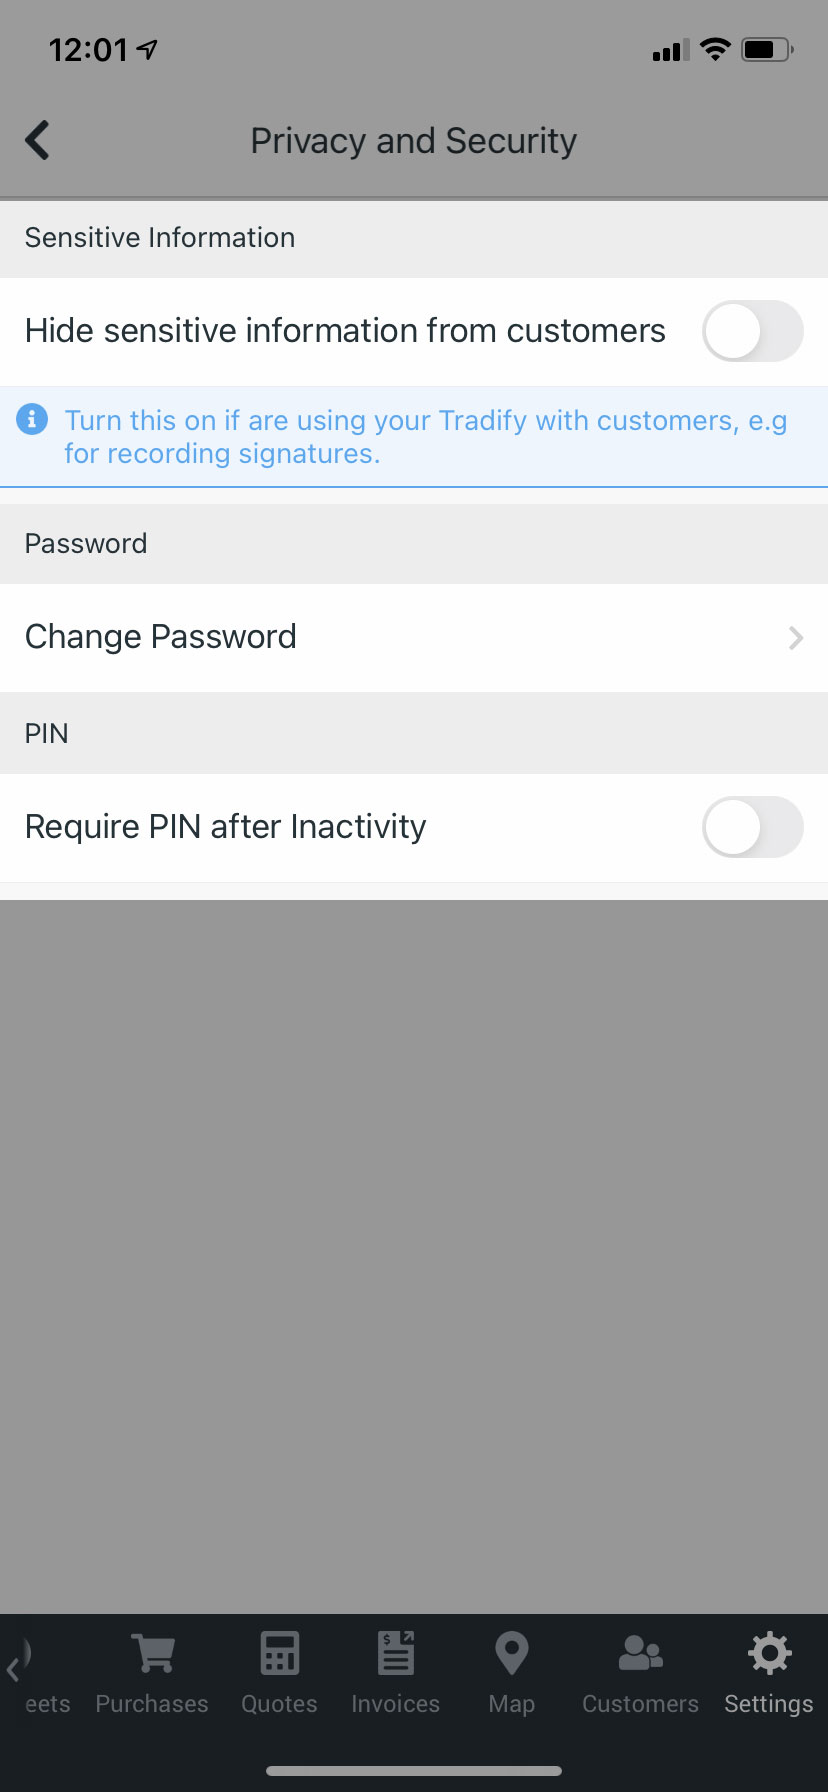 Tradify-Mobile-AppPrivacy-and-Security-Settings-Page.jpg